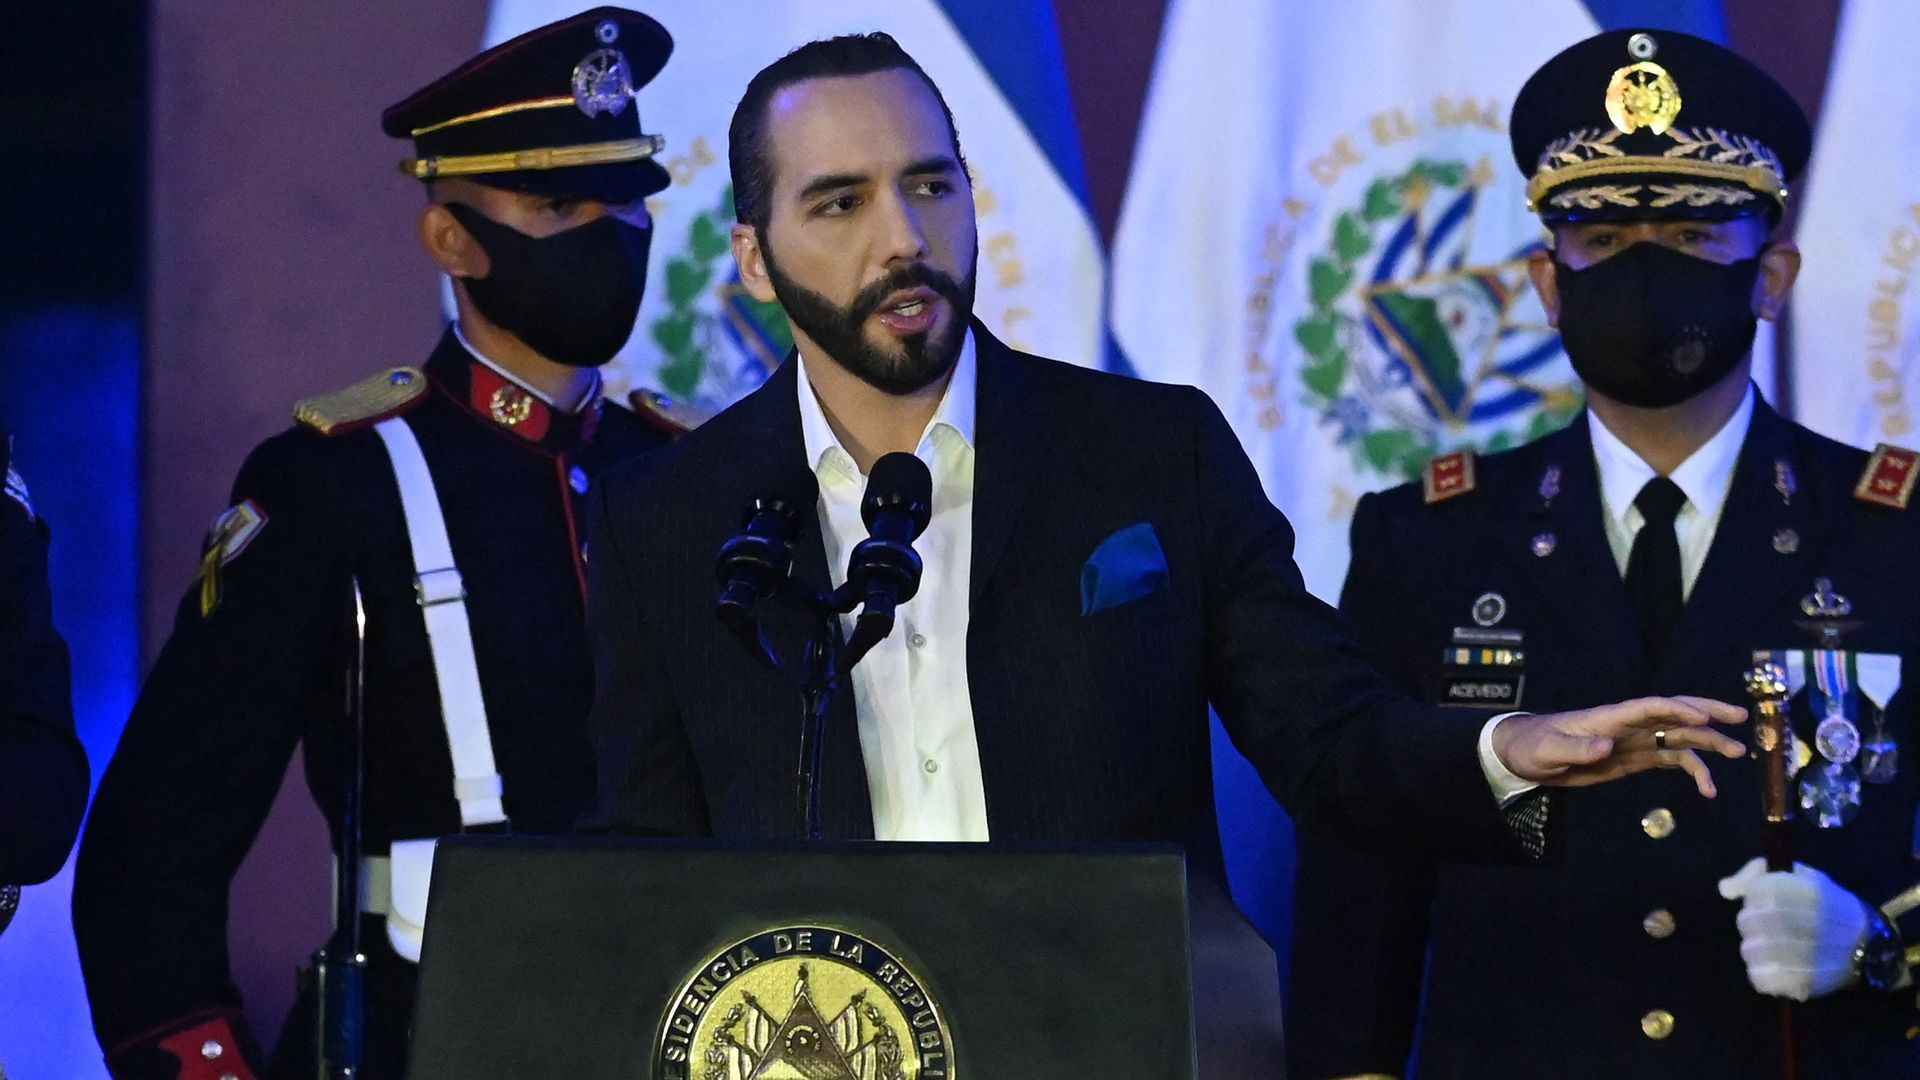 El Salvador President Nayib Bukele stands behind a podium with the presidential seal. 